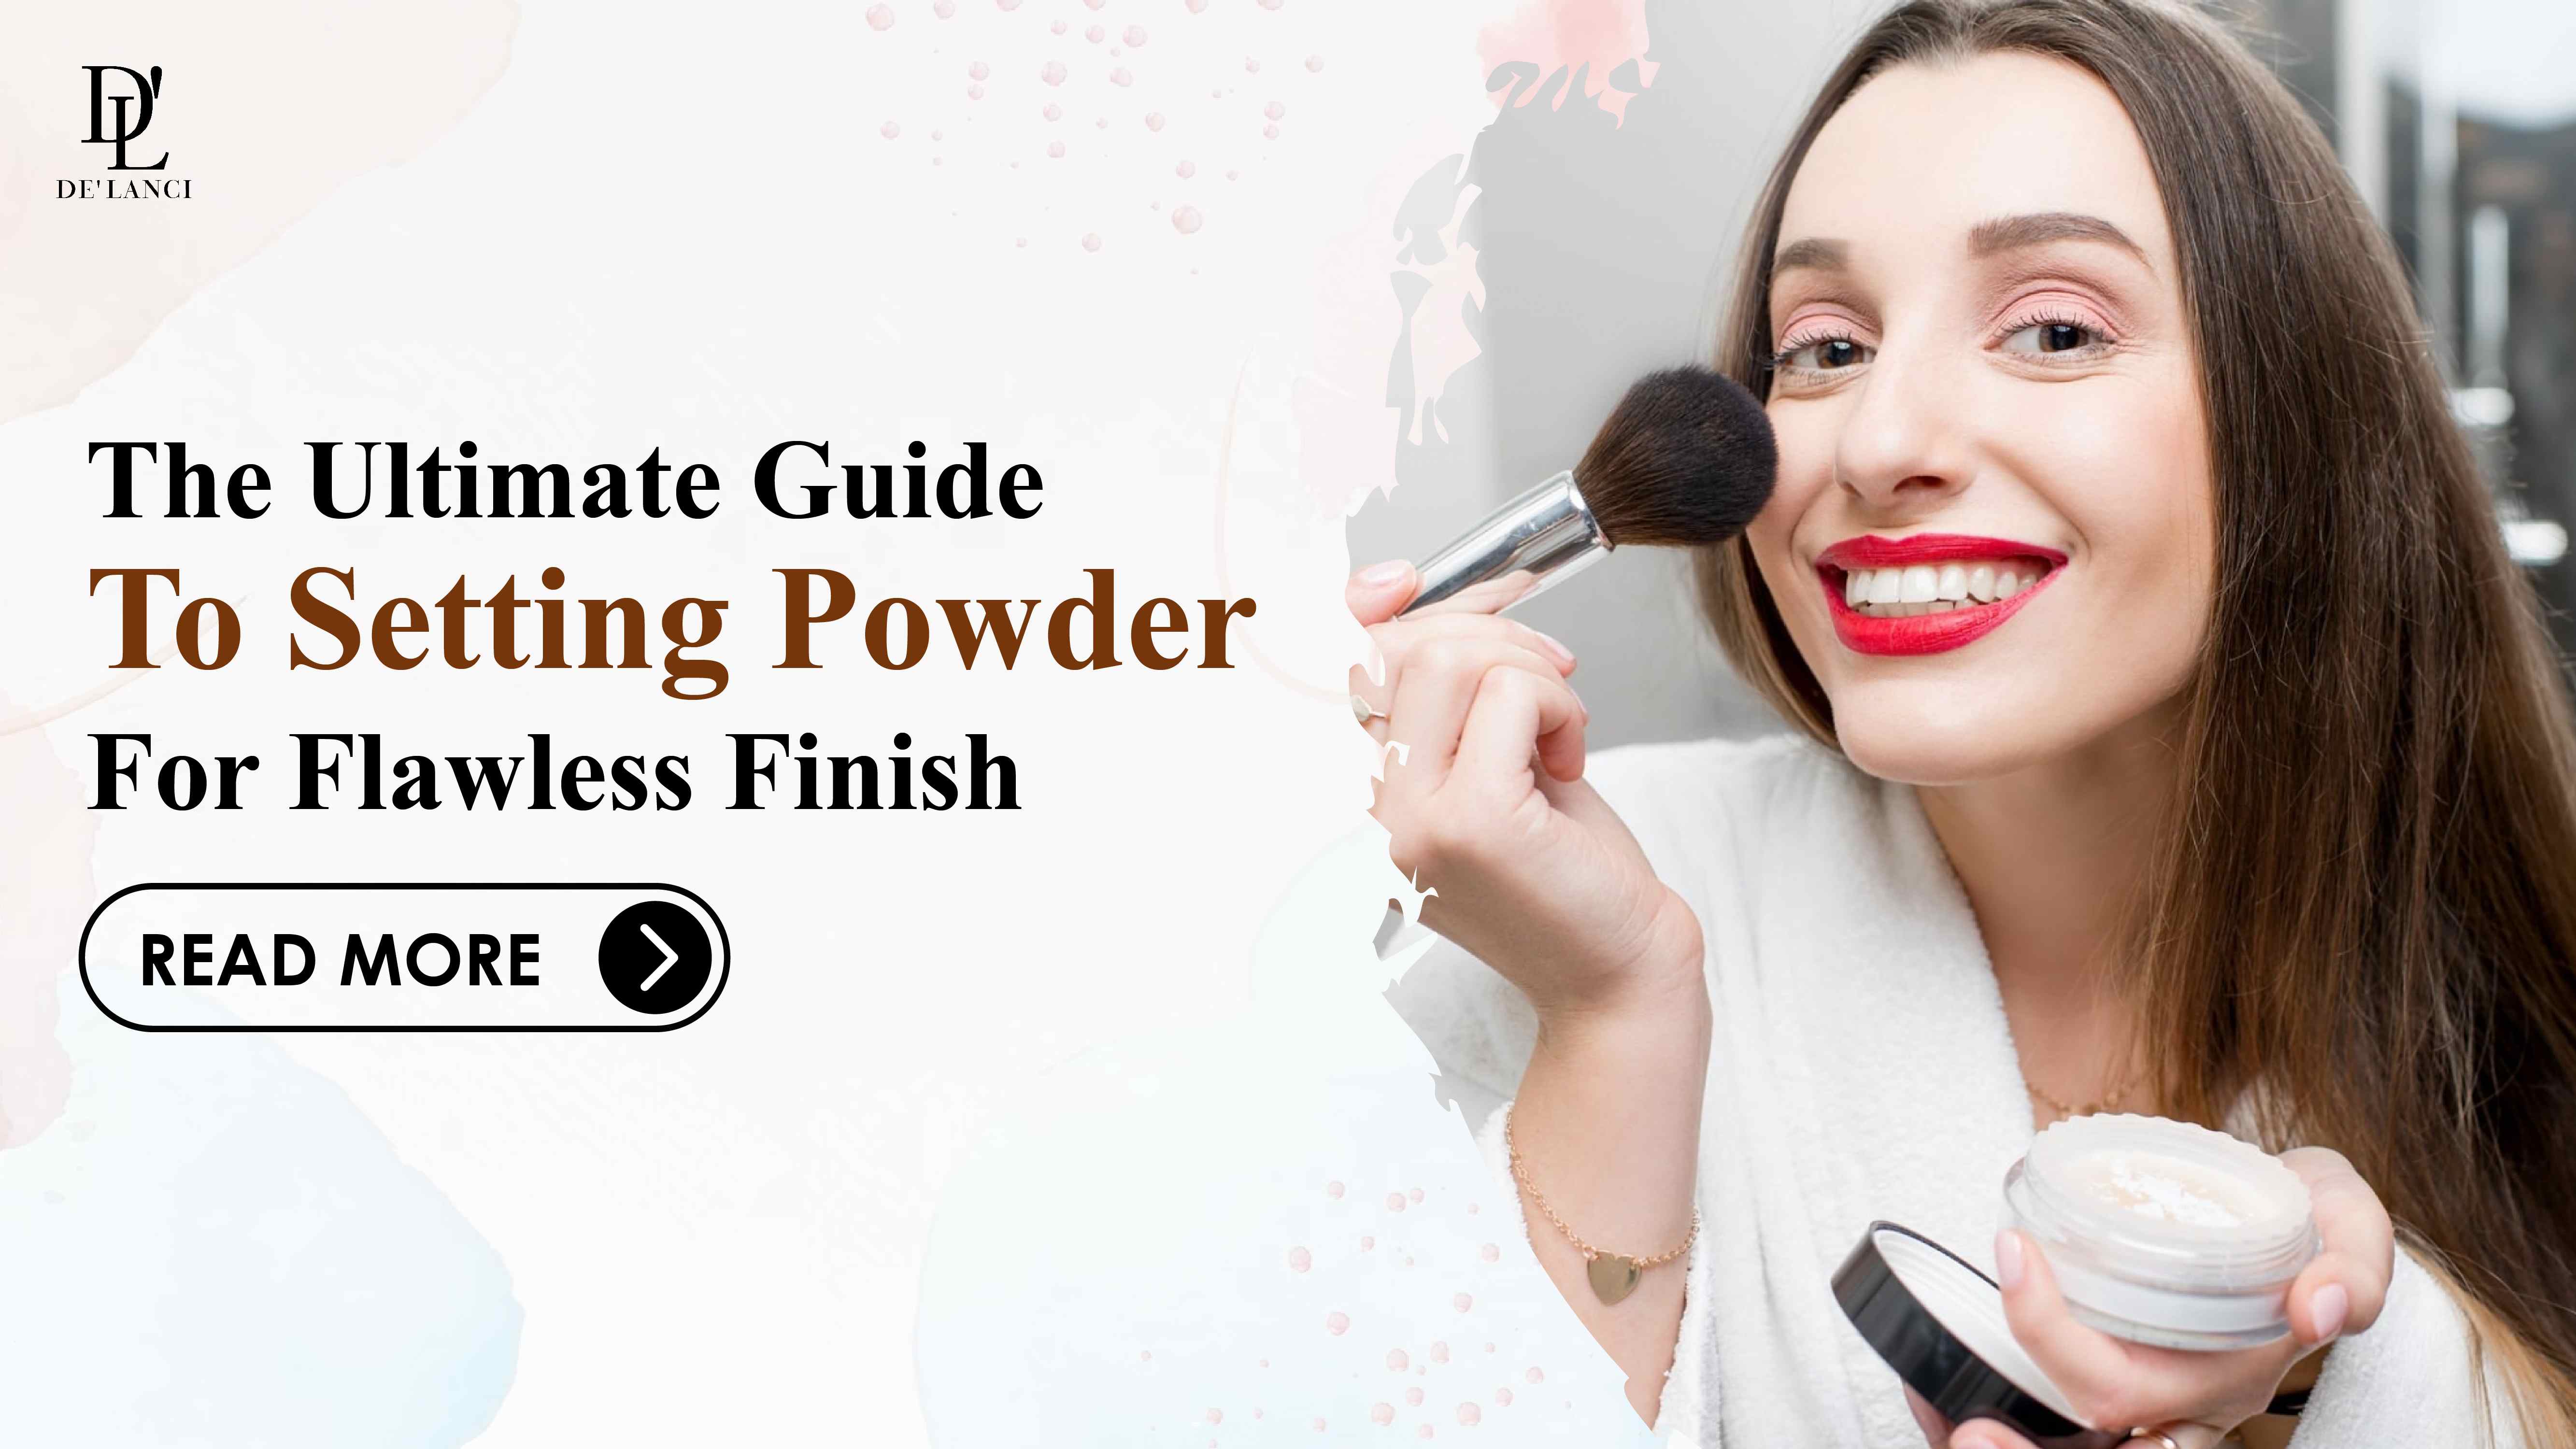 http://www.de-lanci.com/cdn/shop/articles/The_Ultimate_Guide_To_Setting_Powder_for_Flawless_Finish.jpg?v=1685442869